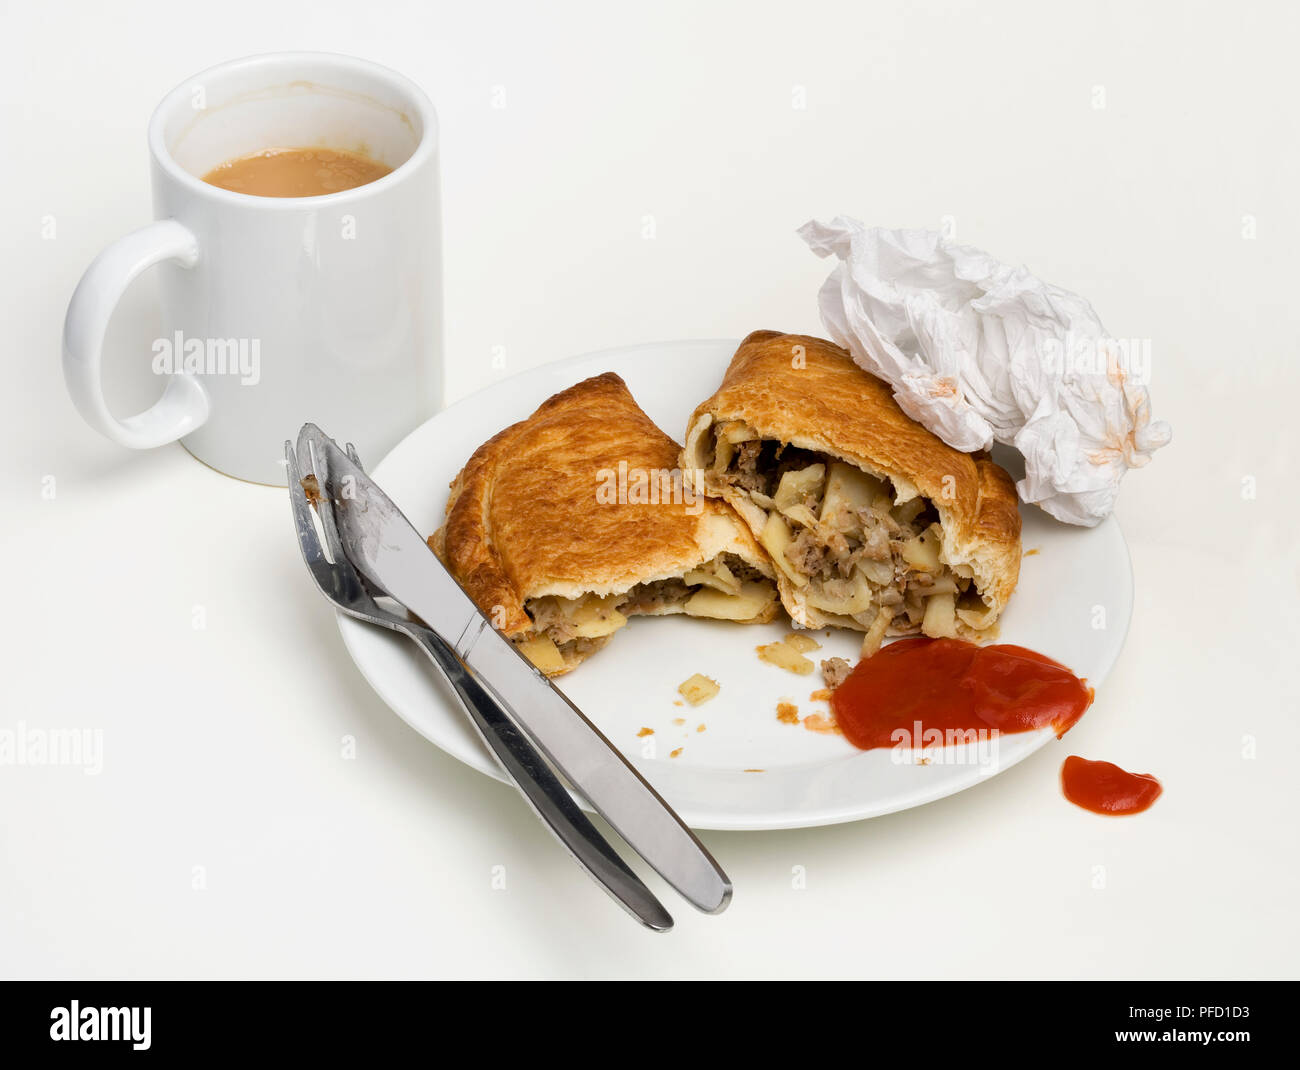 Cornish pasty, stuffed with beef, potatoes and onions, served on a plate with tomato ketchup, cutlery, crumpled napkin, mug of tea Stock Photo